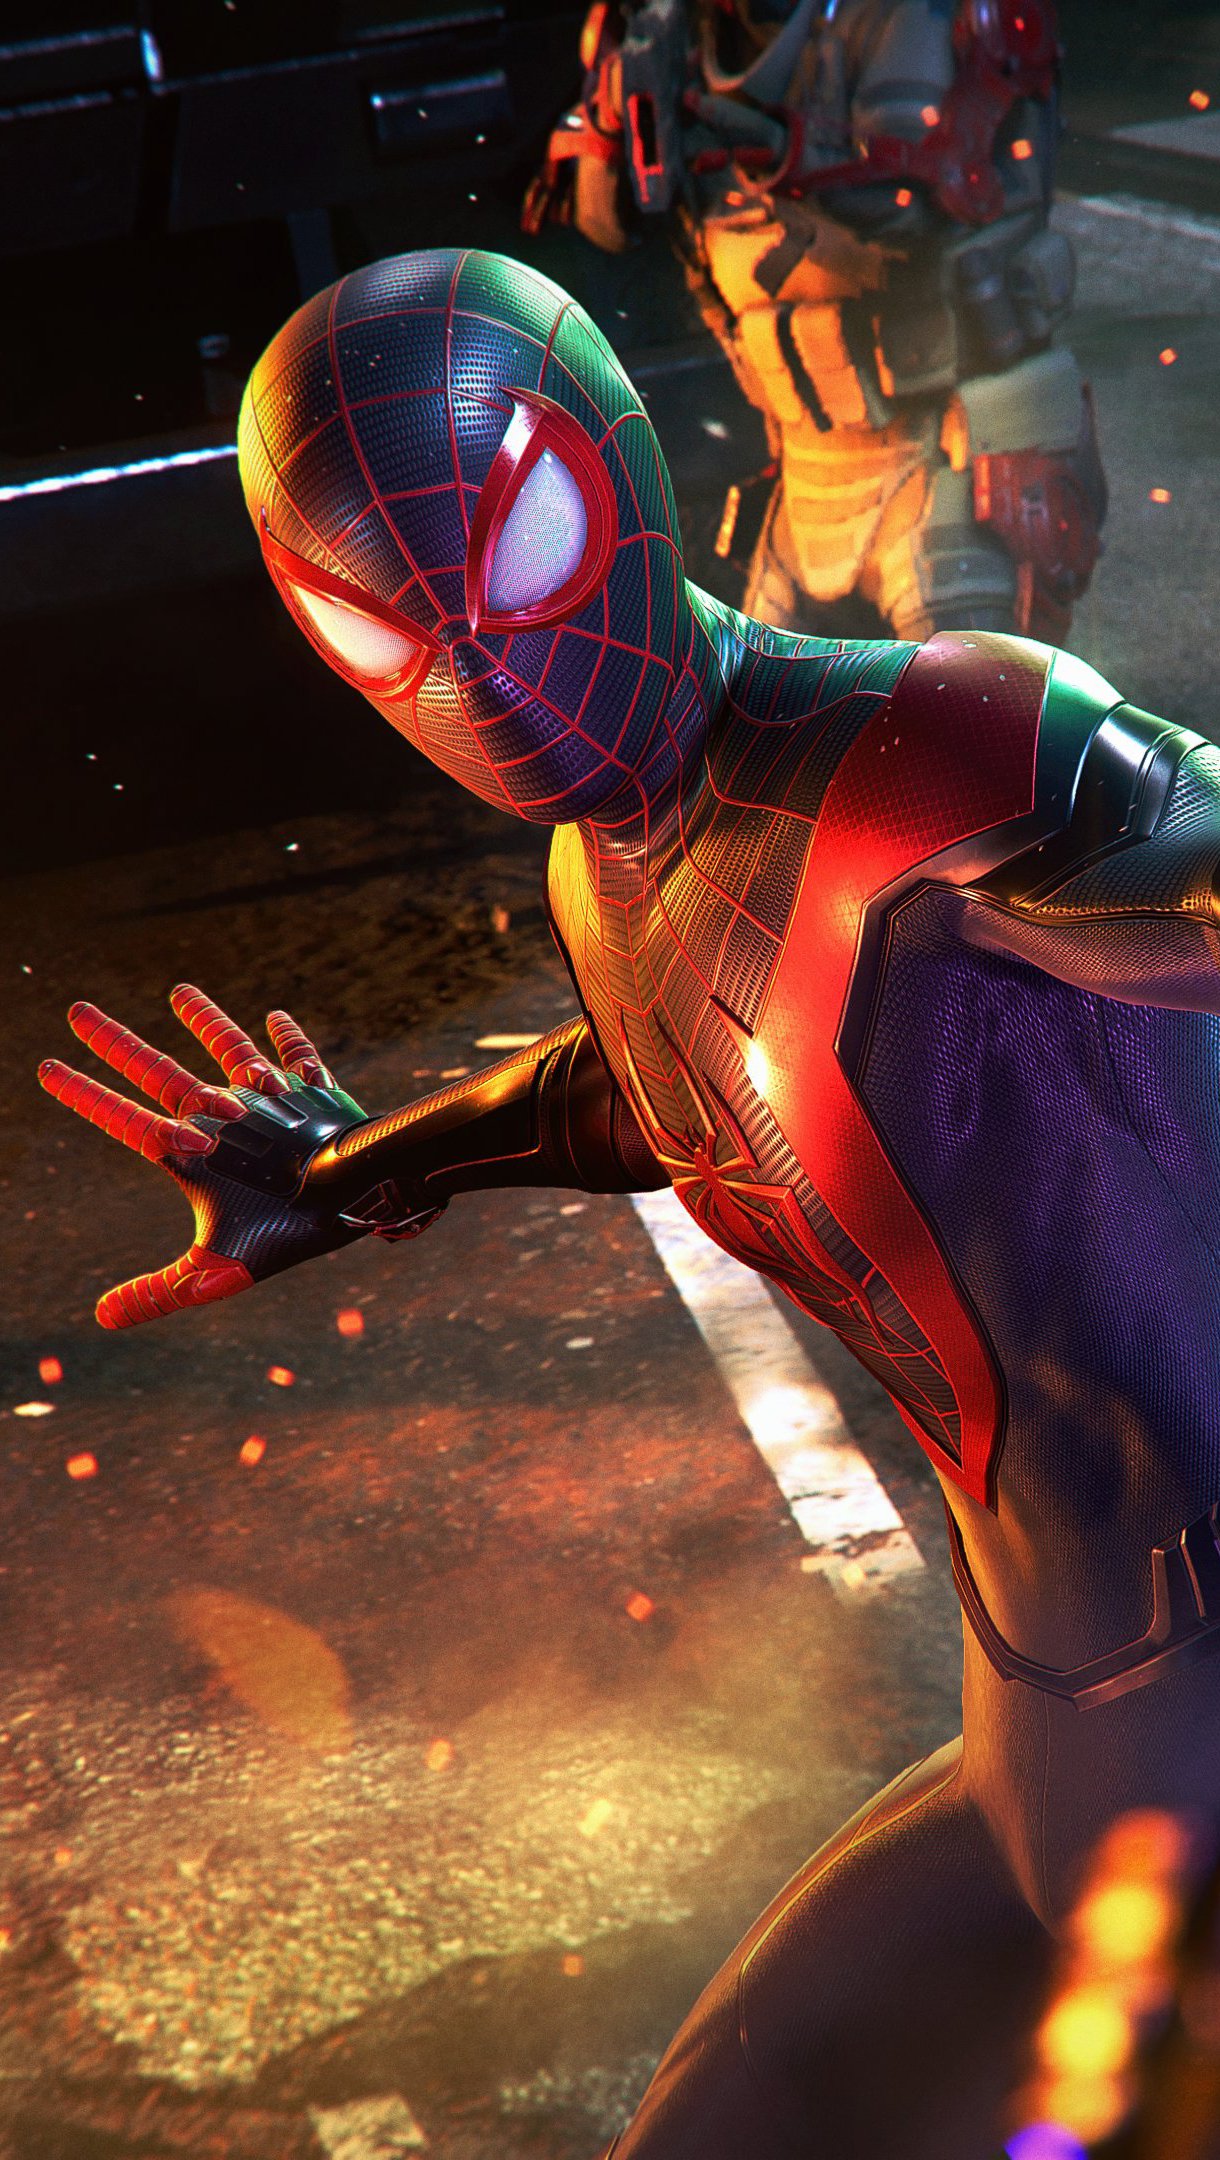 Top Free Spider Man Wallpaper. Download Live Wallapaper Now